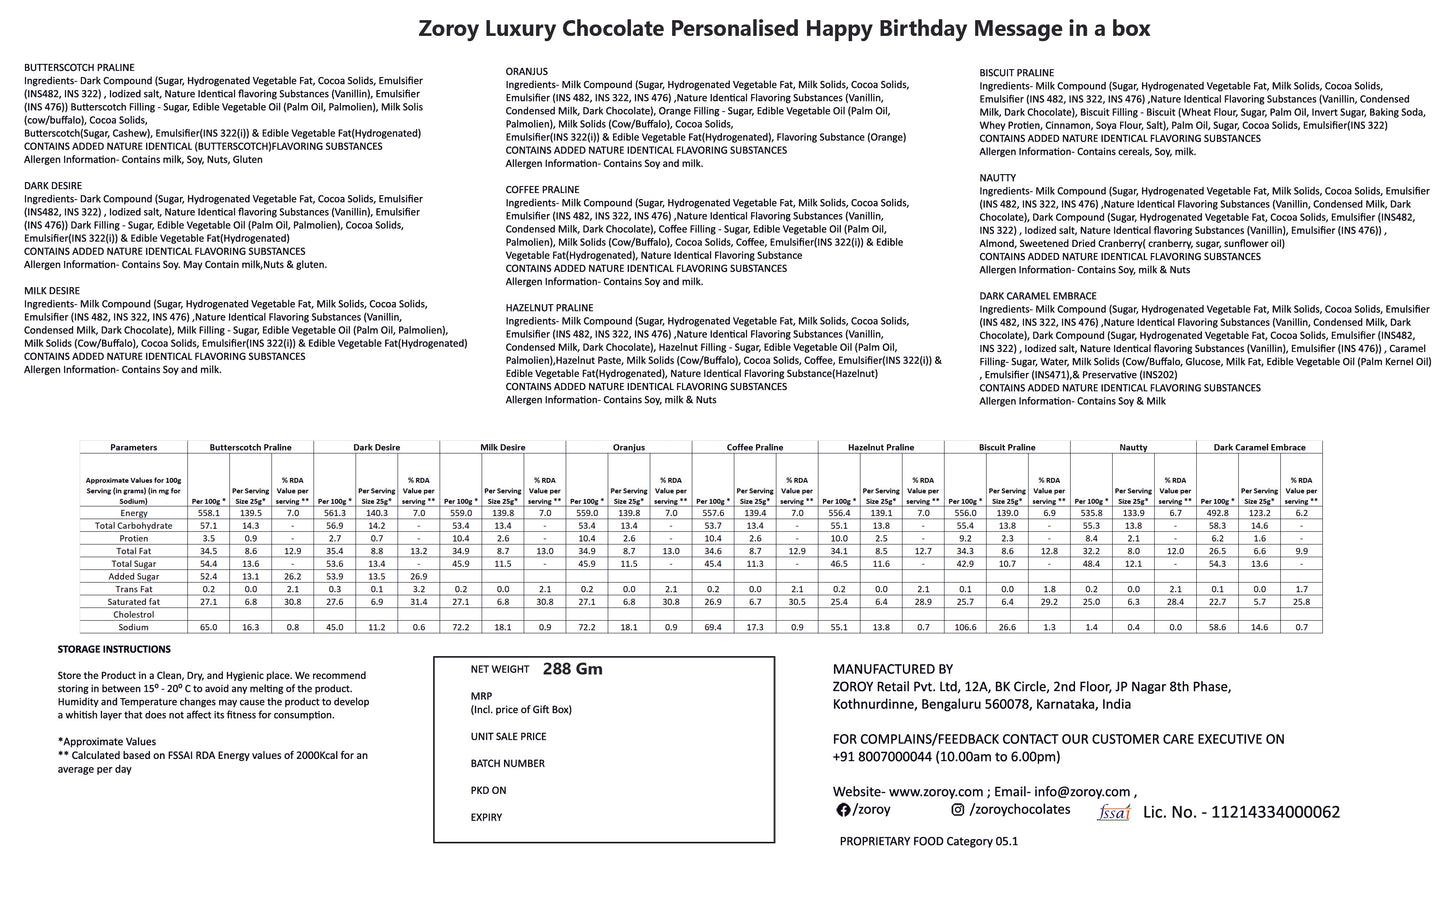 ZOROY Personalised Happy Birthday Message in a Gift box